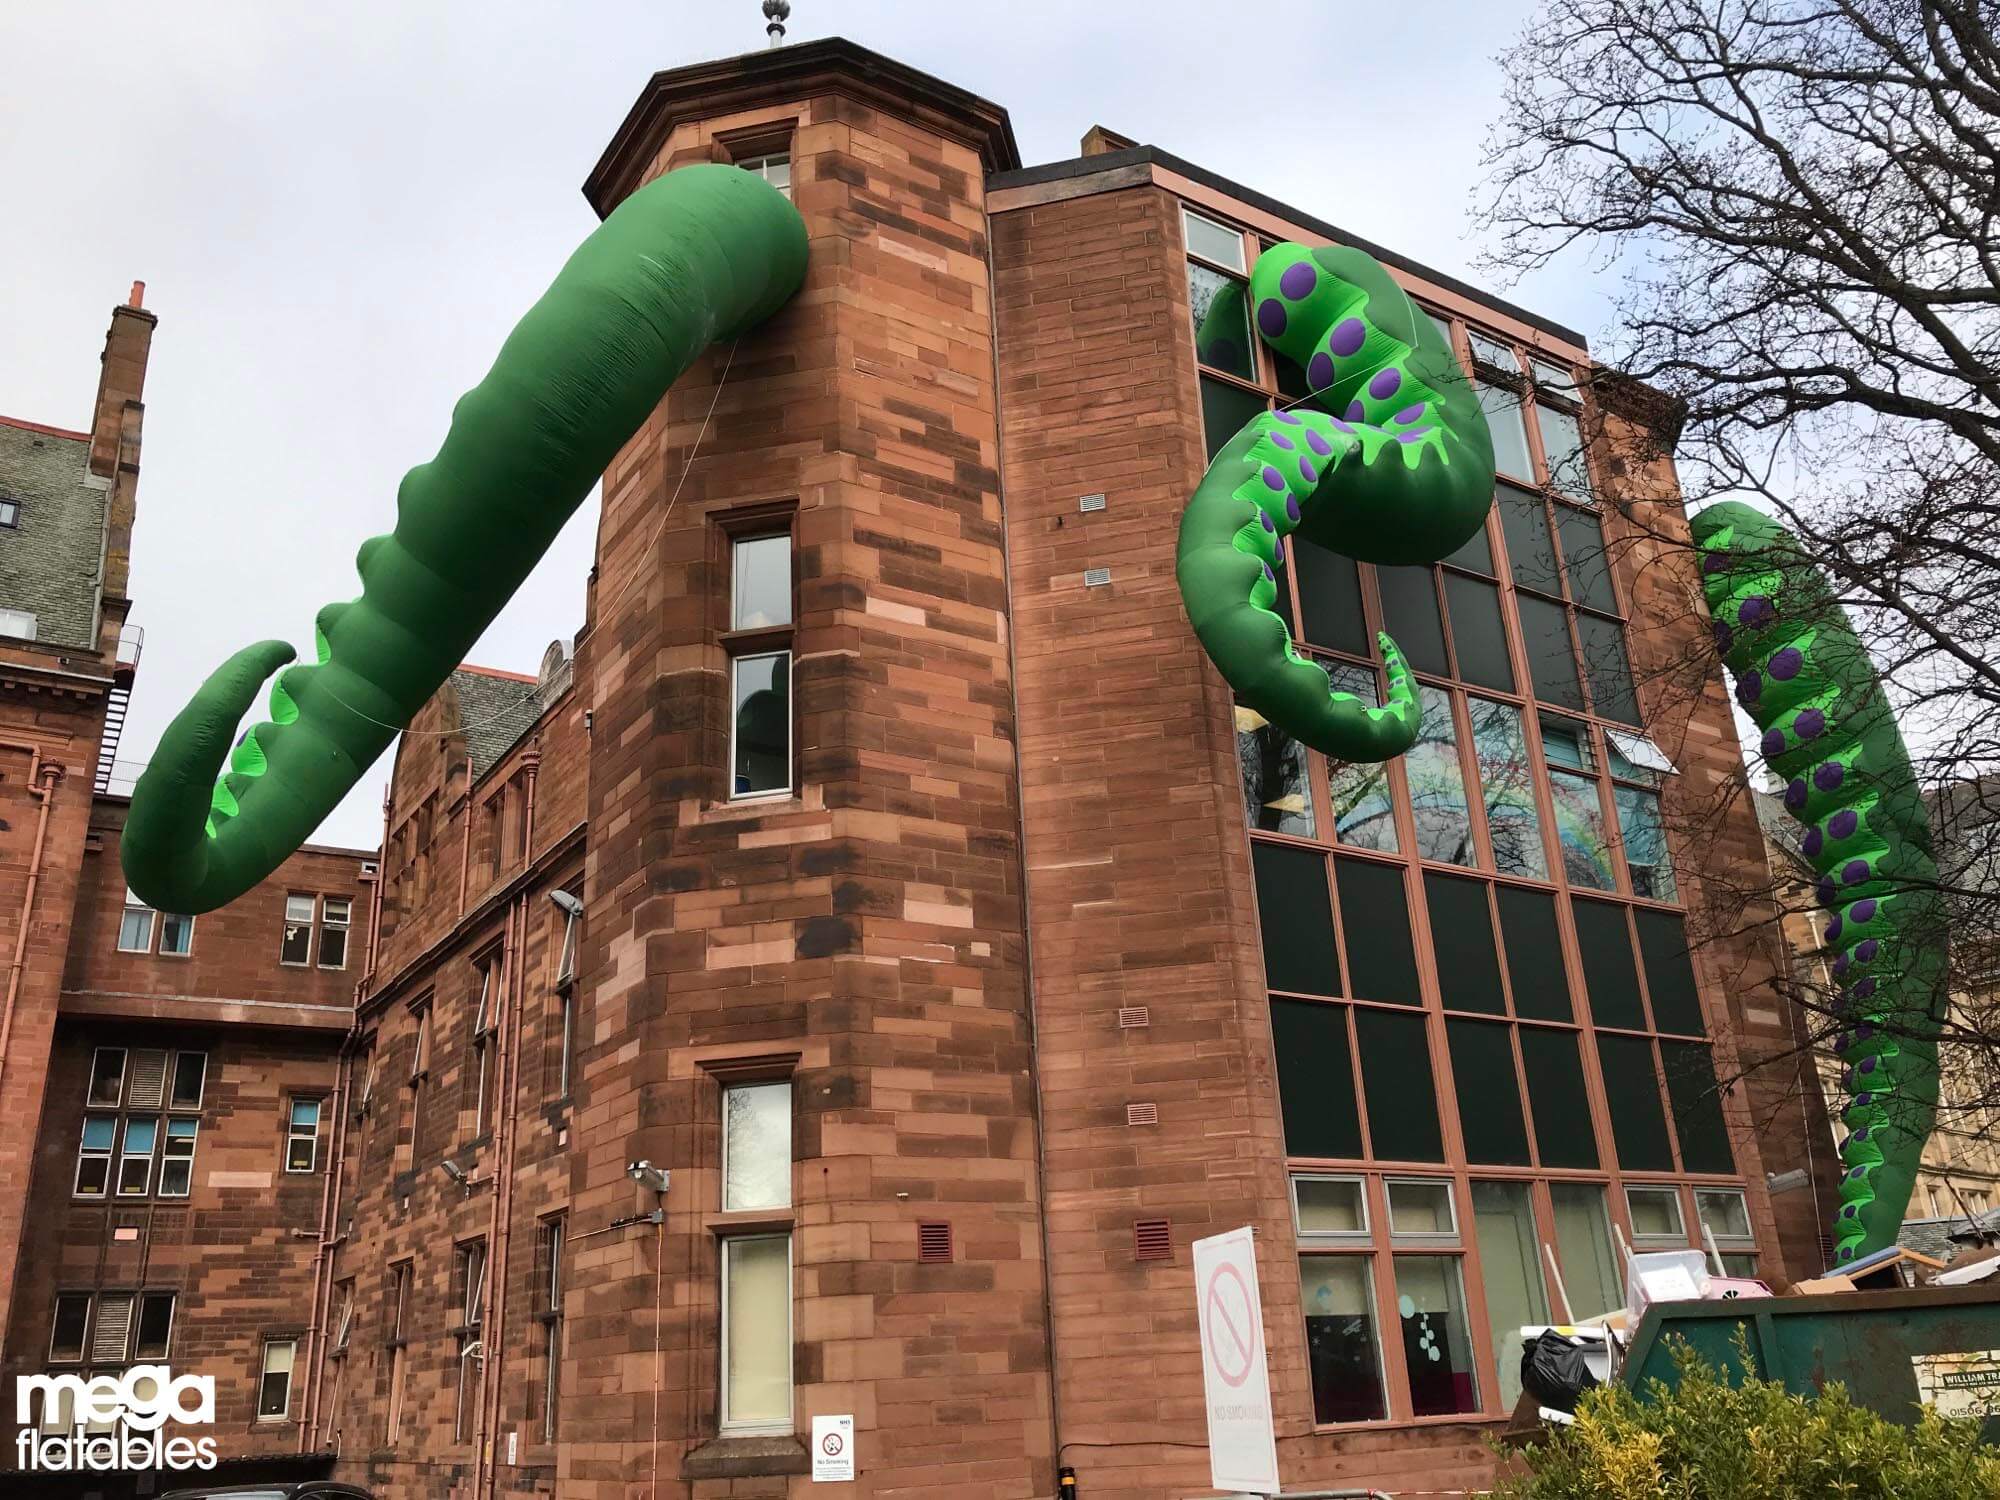 Inflatable octopus